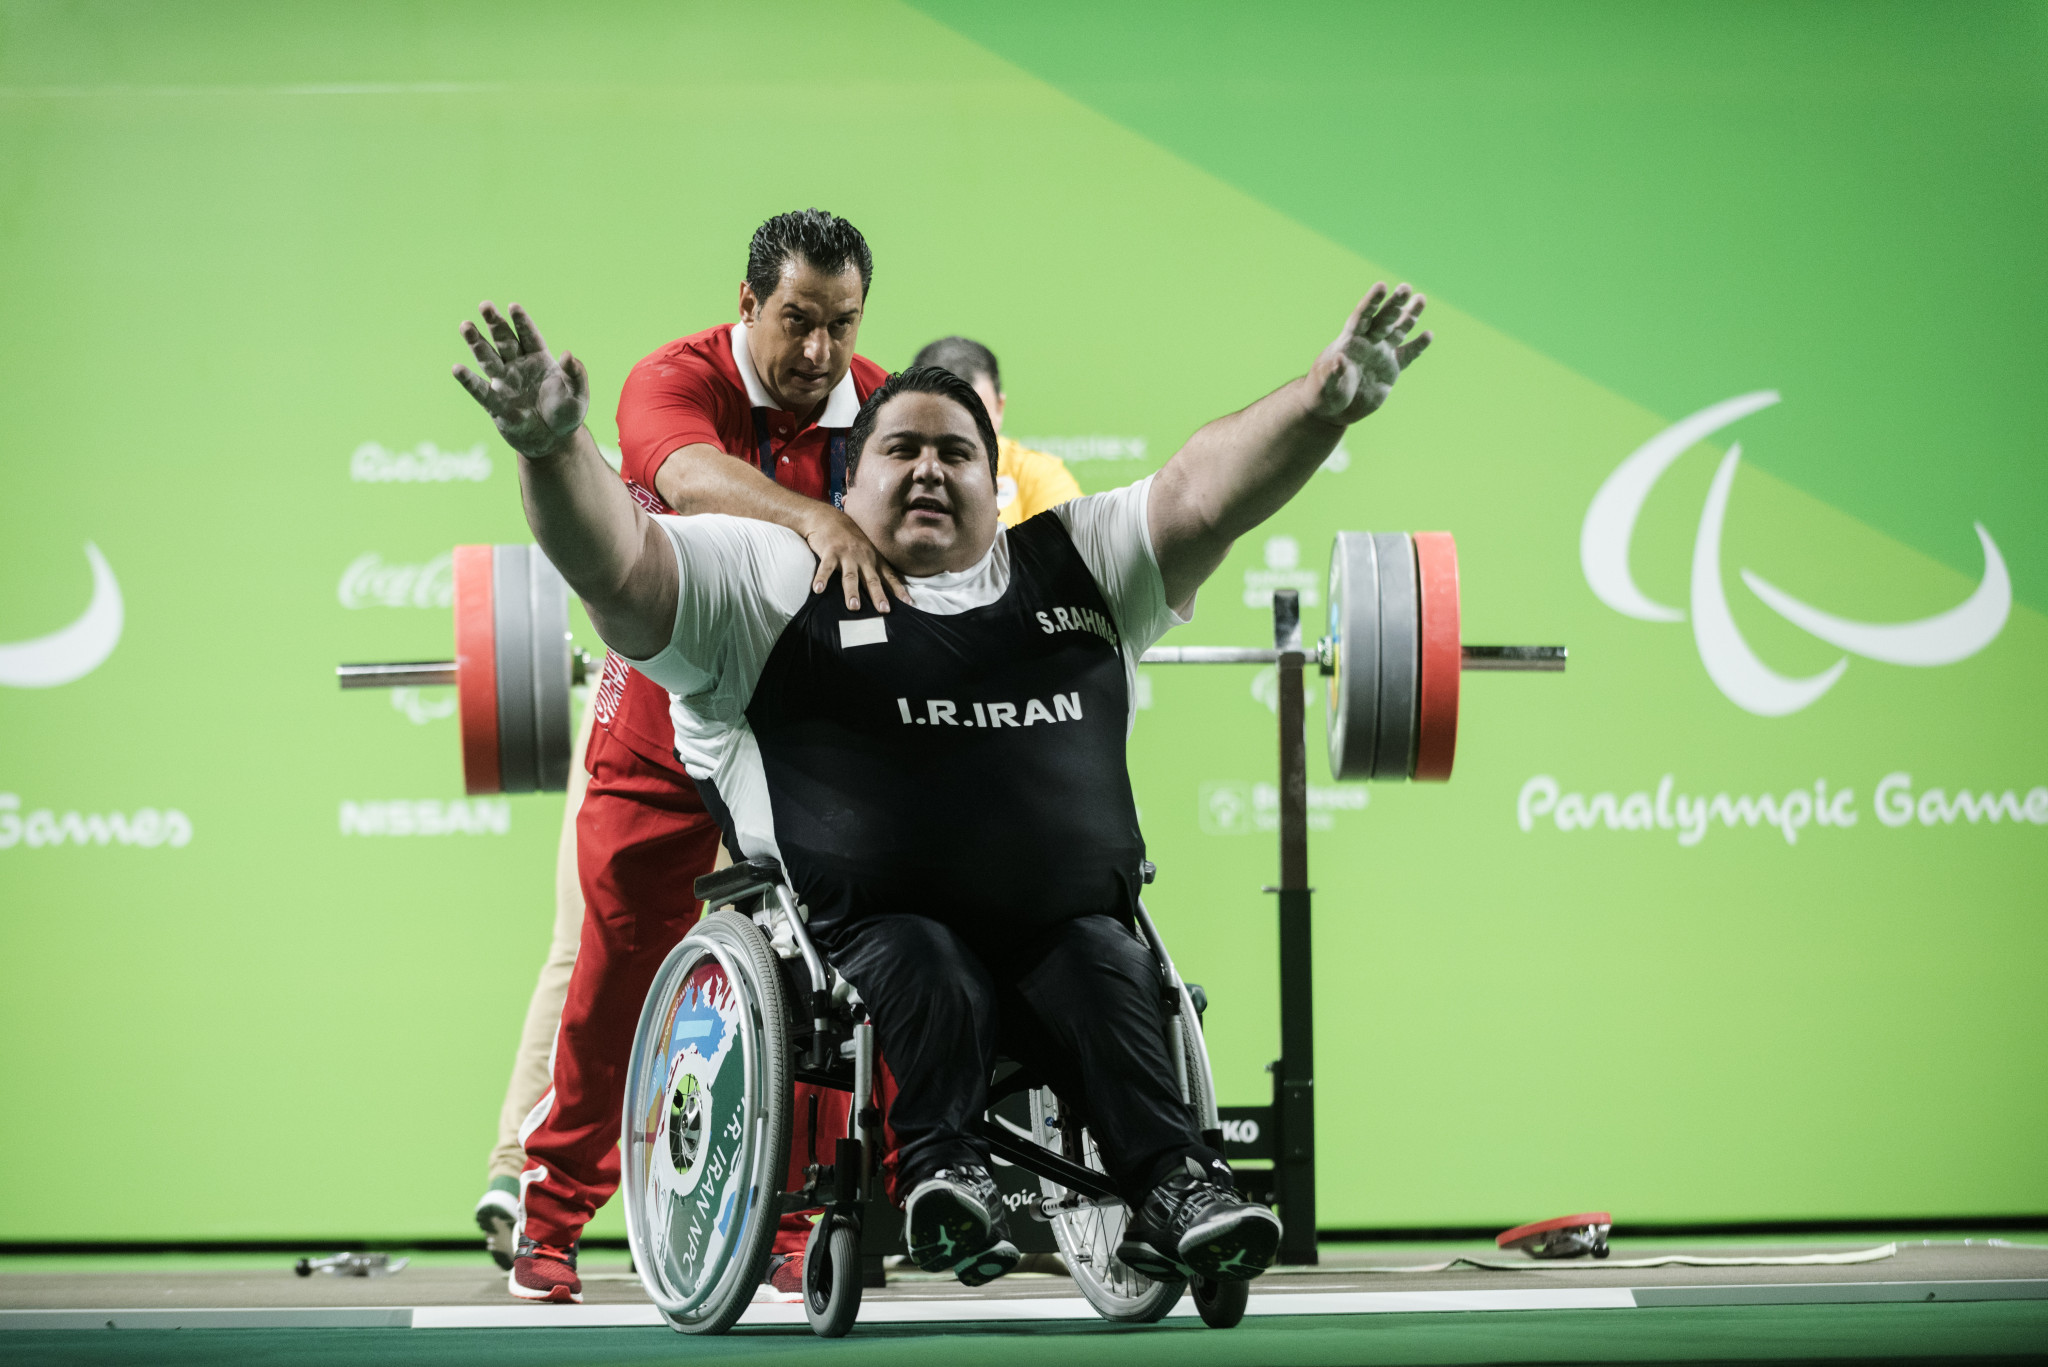 The world's strongest Paralympian Siamand Rahman will be in action in Japan ©Getty Images